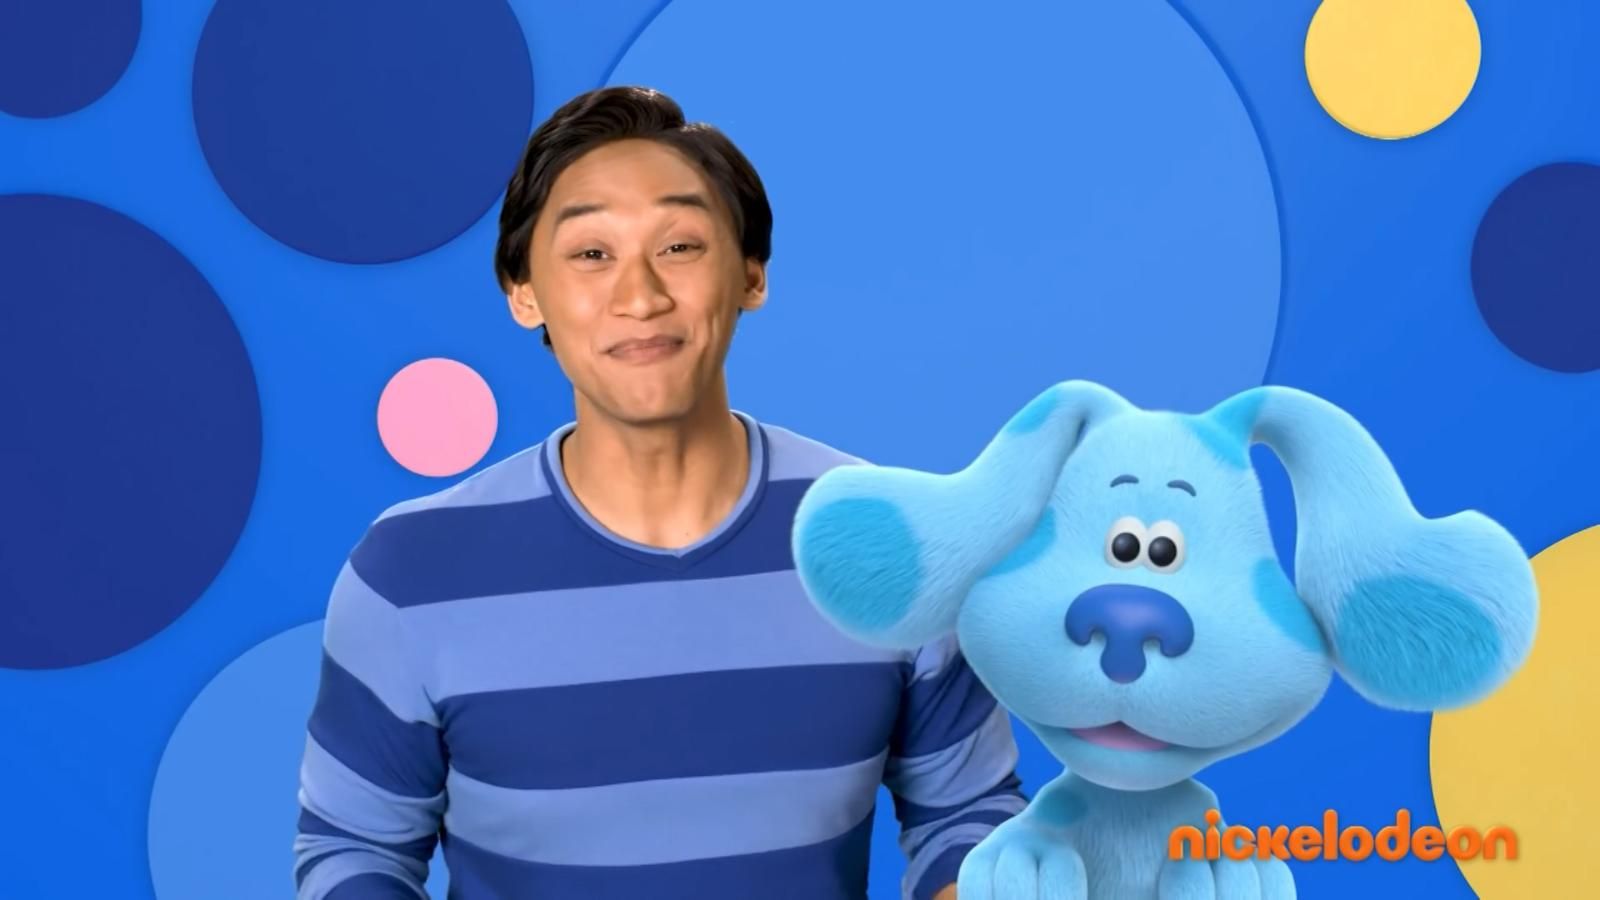 Blue's Clues' is returning and people have mixed feelings